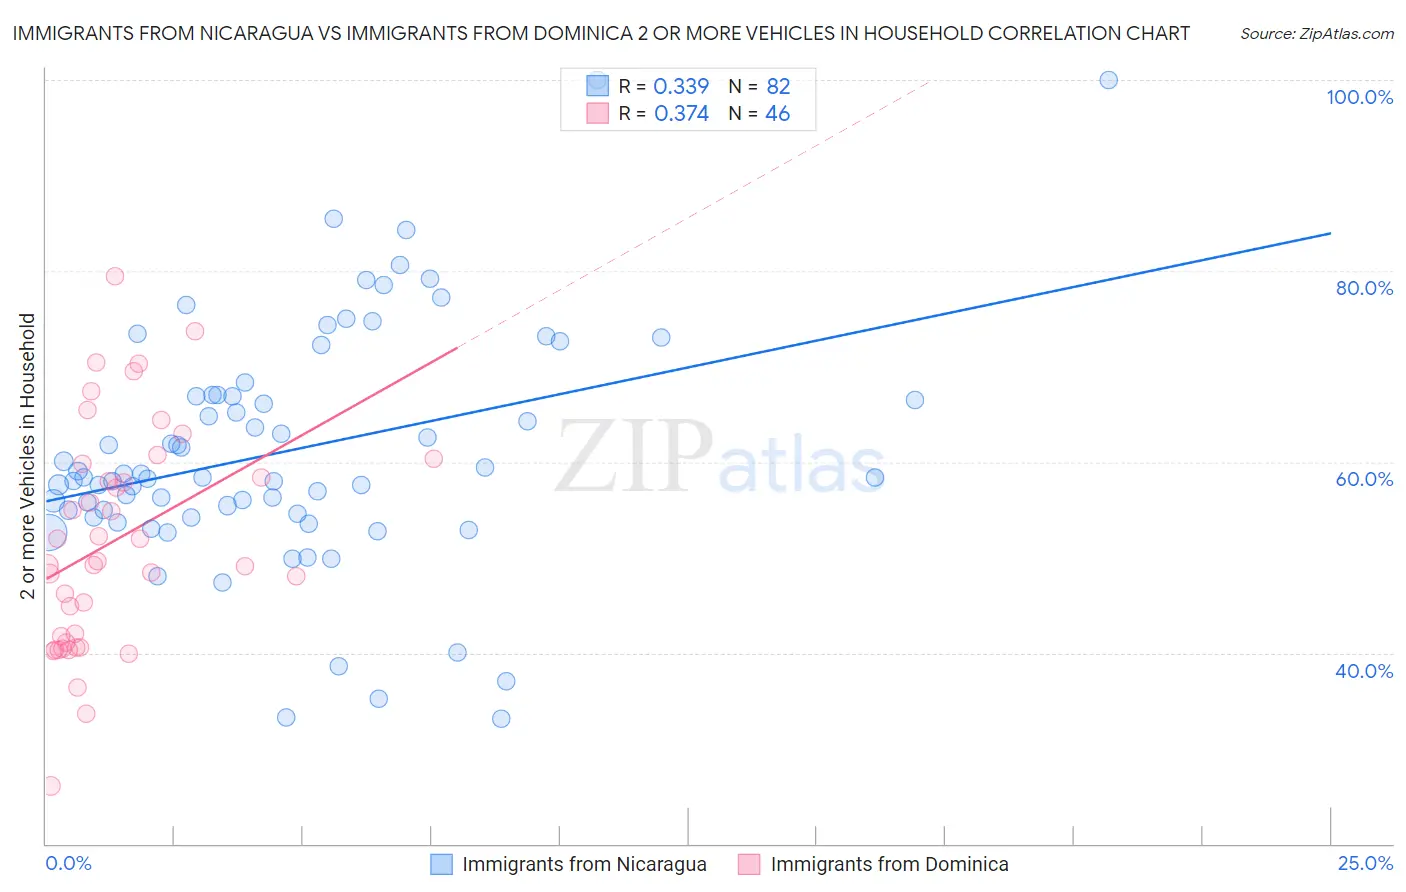 Immigrants from Nicaragua vs Immigrants from Dominica 2 or more Vehicles in Household